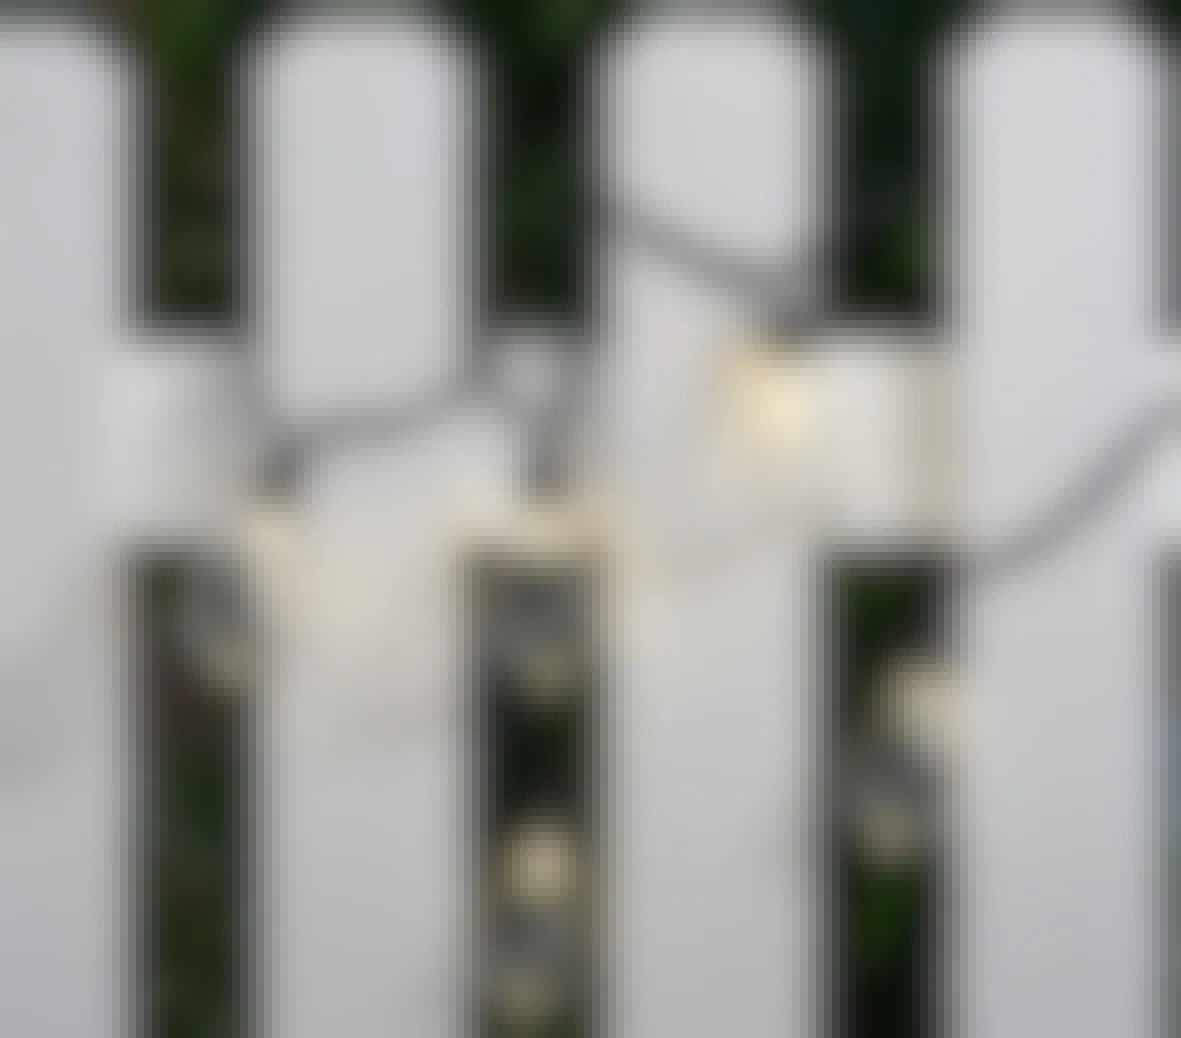 screenshot of Walmart's mainstays outdoor string lights; lights are shown wrapped around white fencing